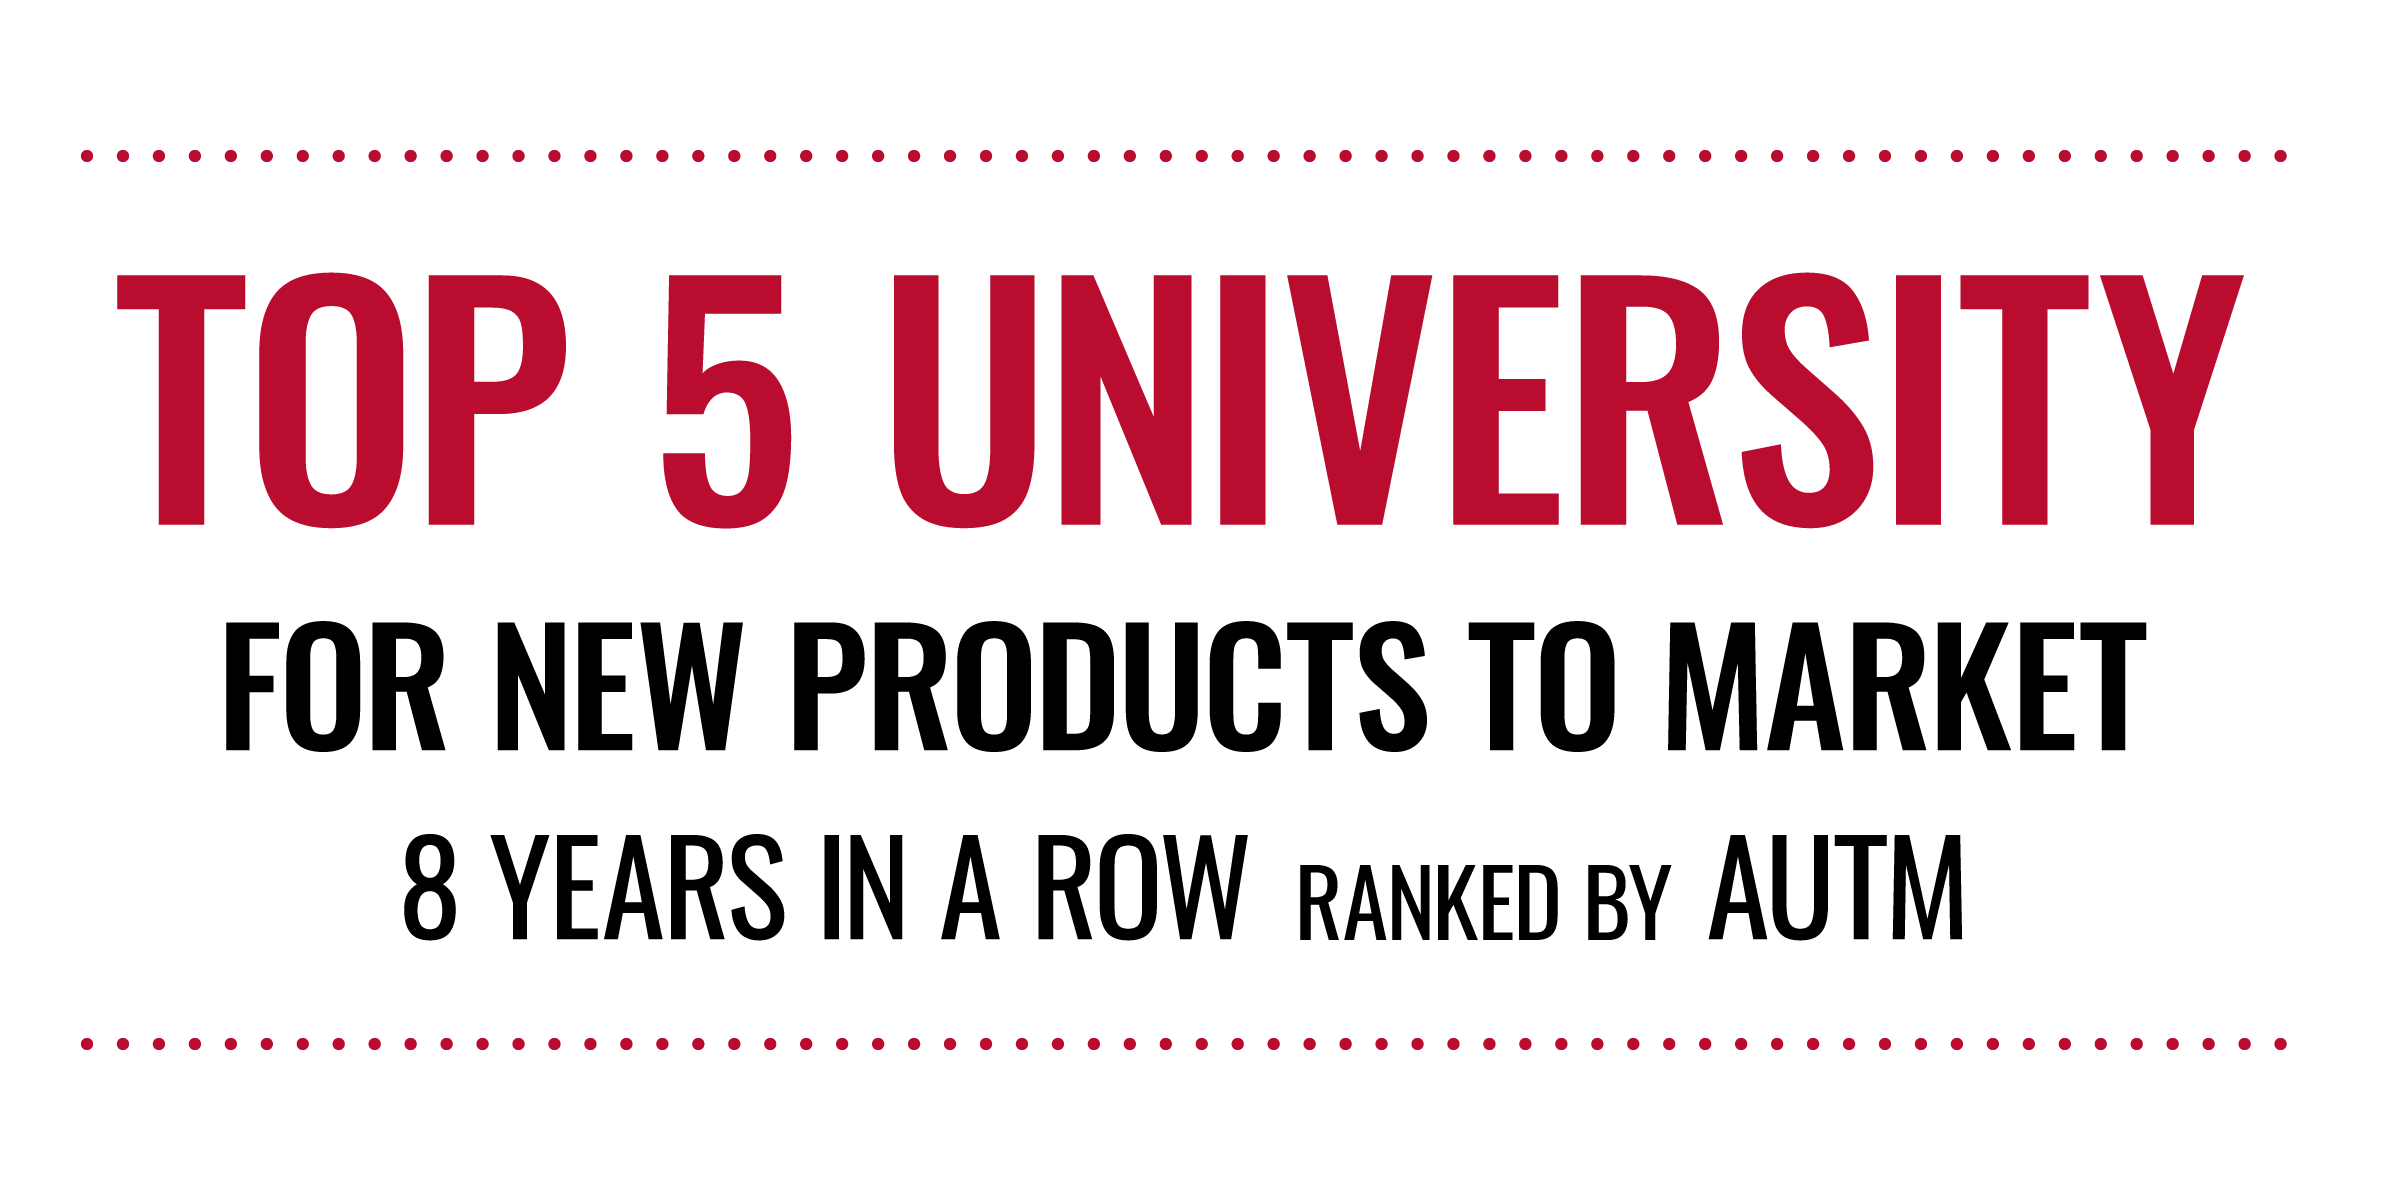 Top 5 University for New Products to Market 8 years in a row, ranked by AUTM